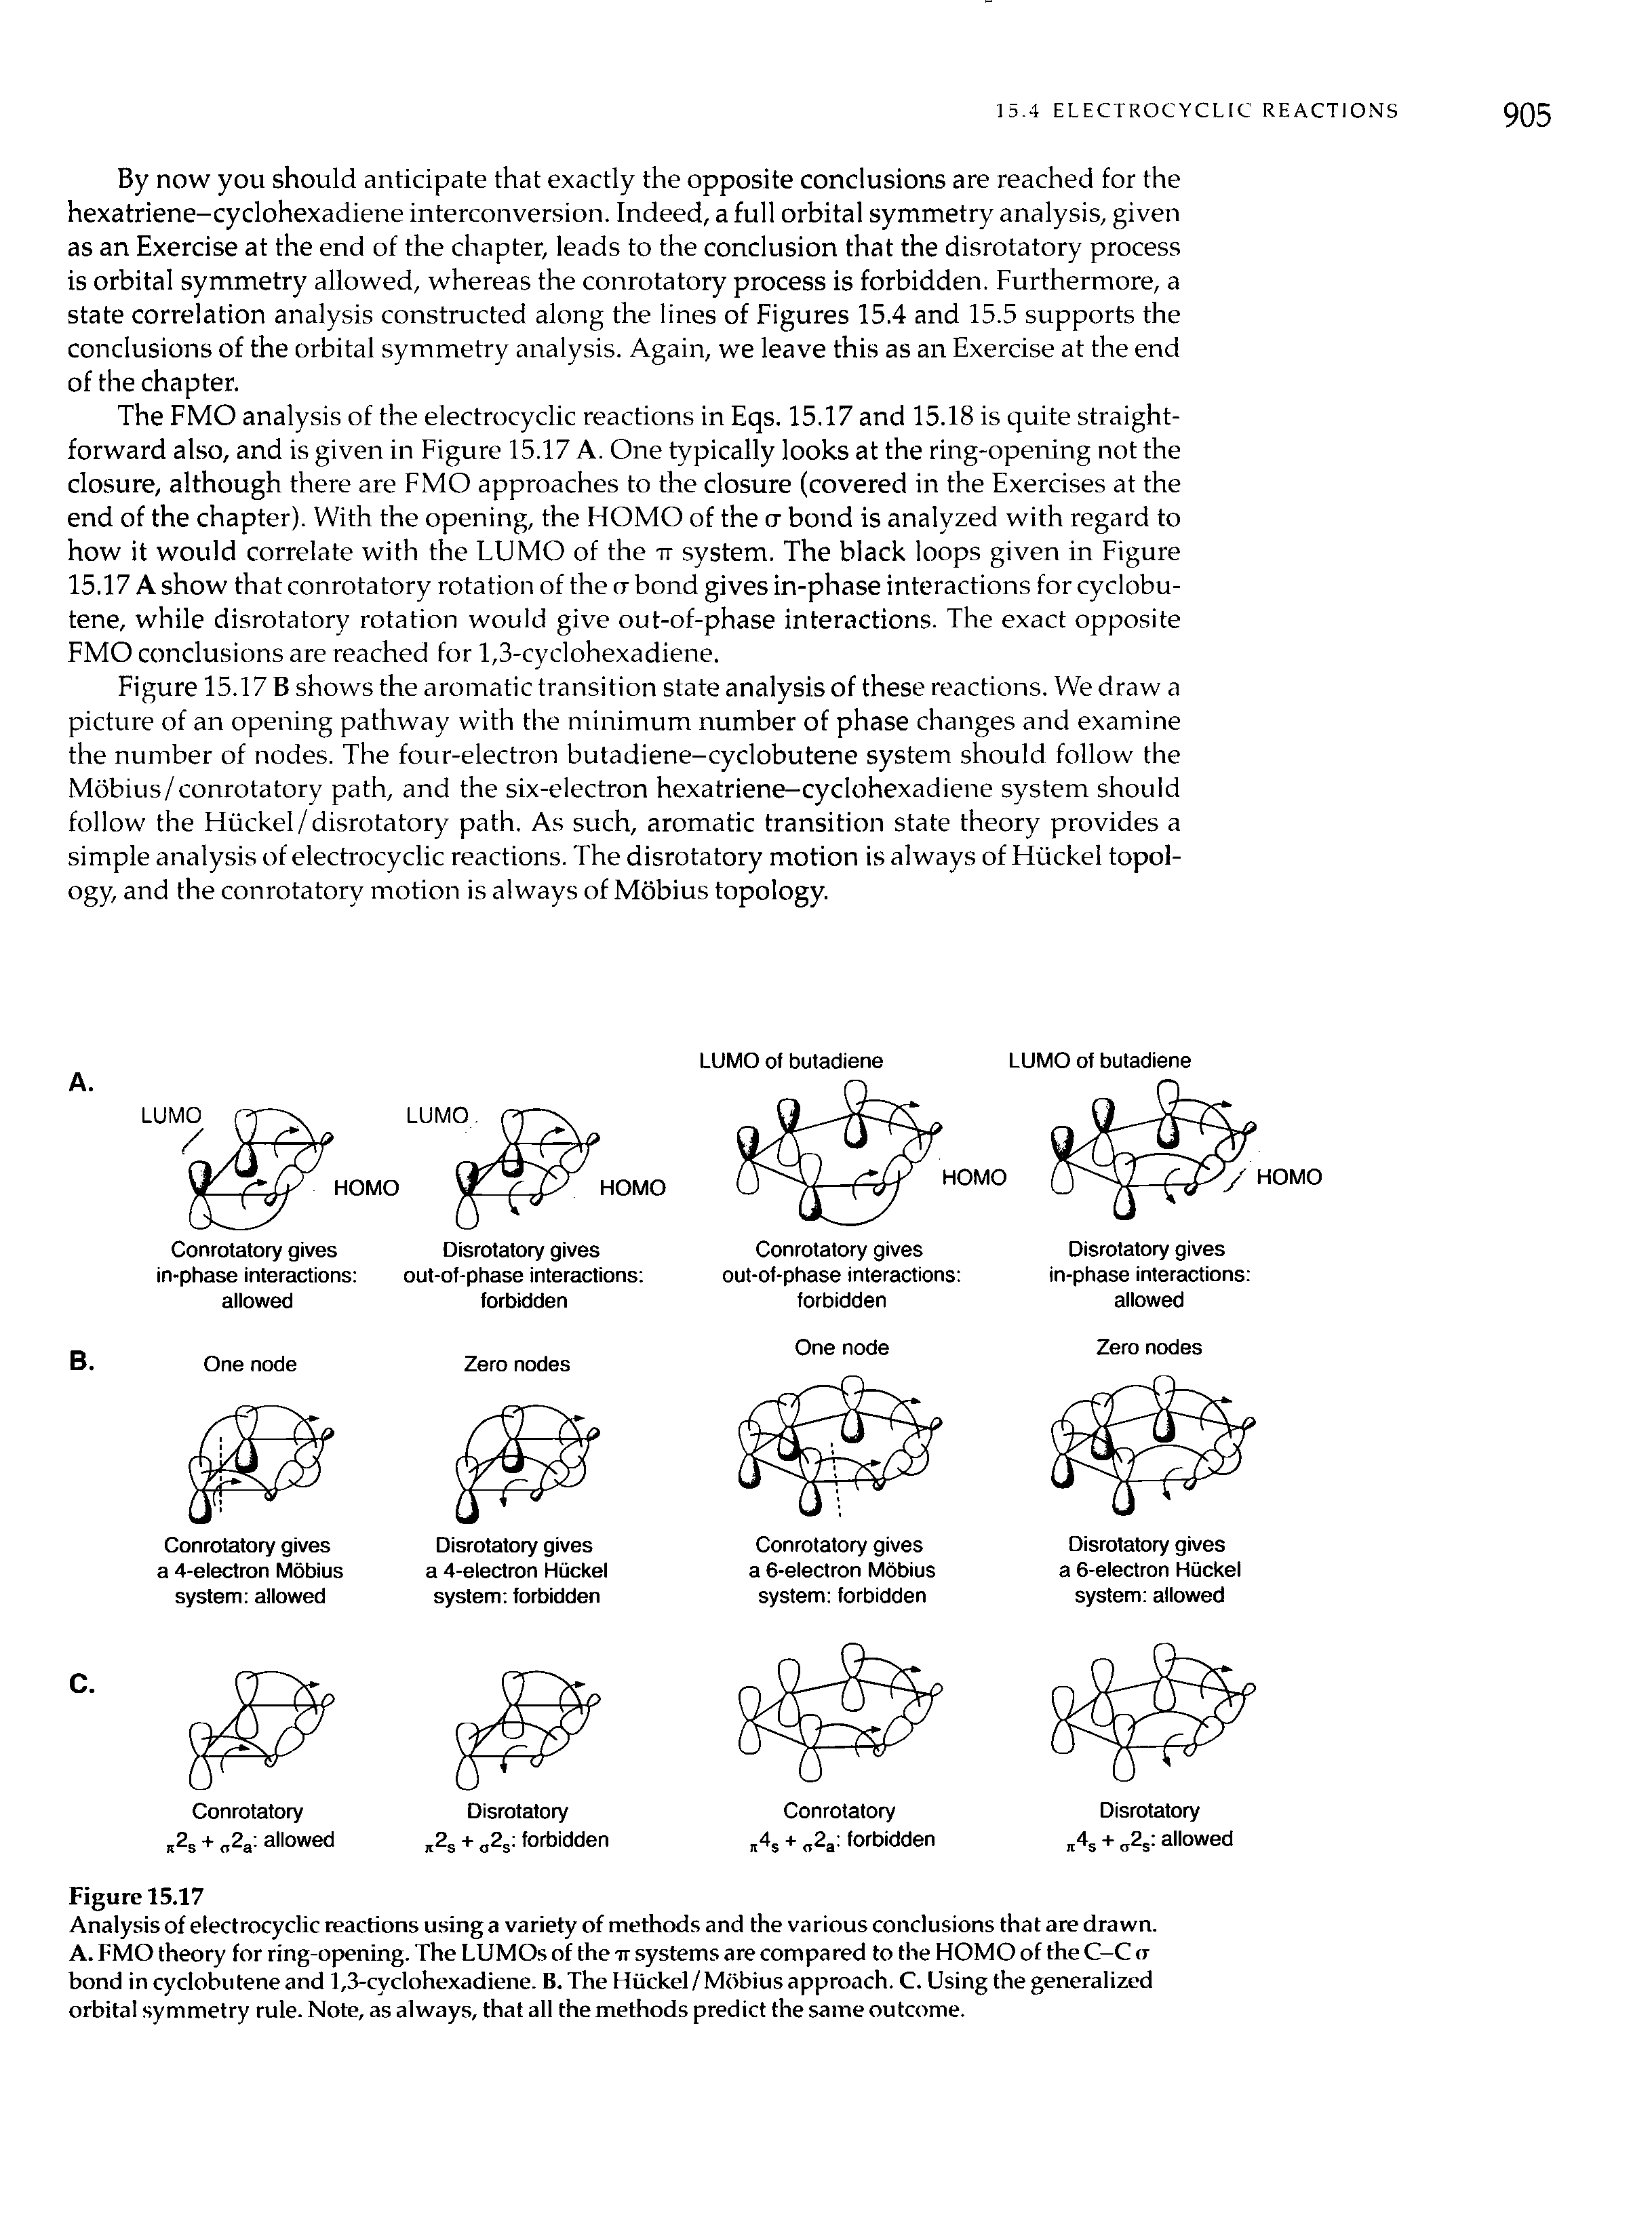 Figure 15.17 B shows the aromatic transition state analysis of these reactions. We draw a picture of an opening pathway with the minimum number of phase changes and examine the number of nodes. The four-electron butadiene-cyclobutene system should follow the Mobius/conrotatory path, and the six-electron hexatriene-cyclohexadiene system should follow the Hiickel/disrotatory path. As such, aromatic transition state theory provides a simple analysis of electrocyclic reactions. The disrotatory motion is always of Hiickel topology, and the conrotatory motion is always of Mobius topology.